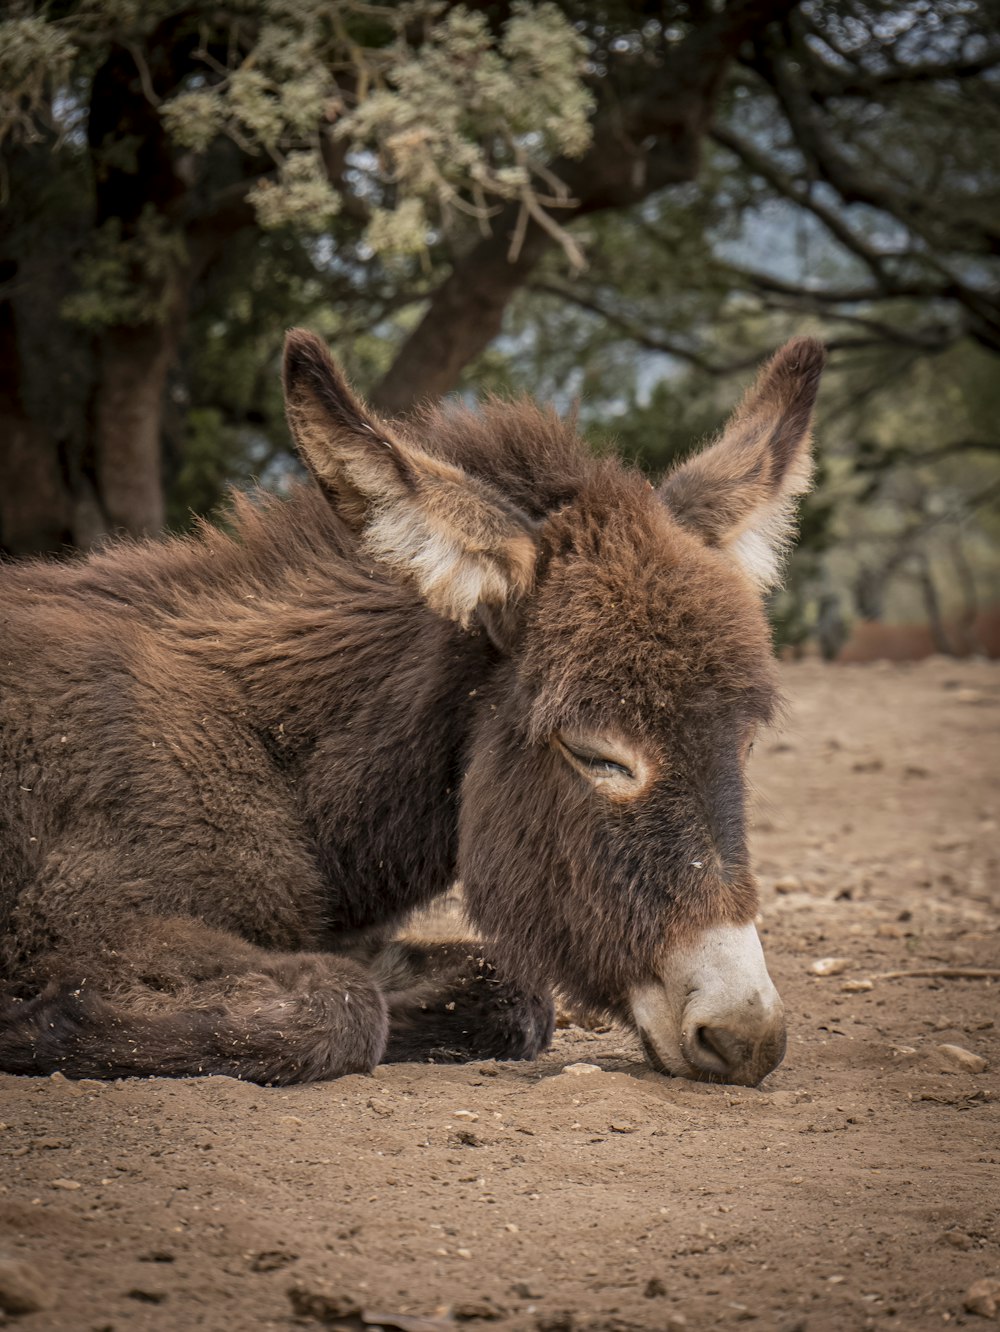 a donkey laying down on a dirt road